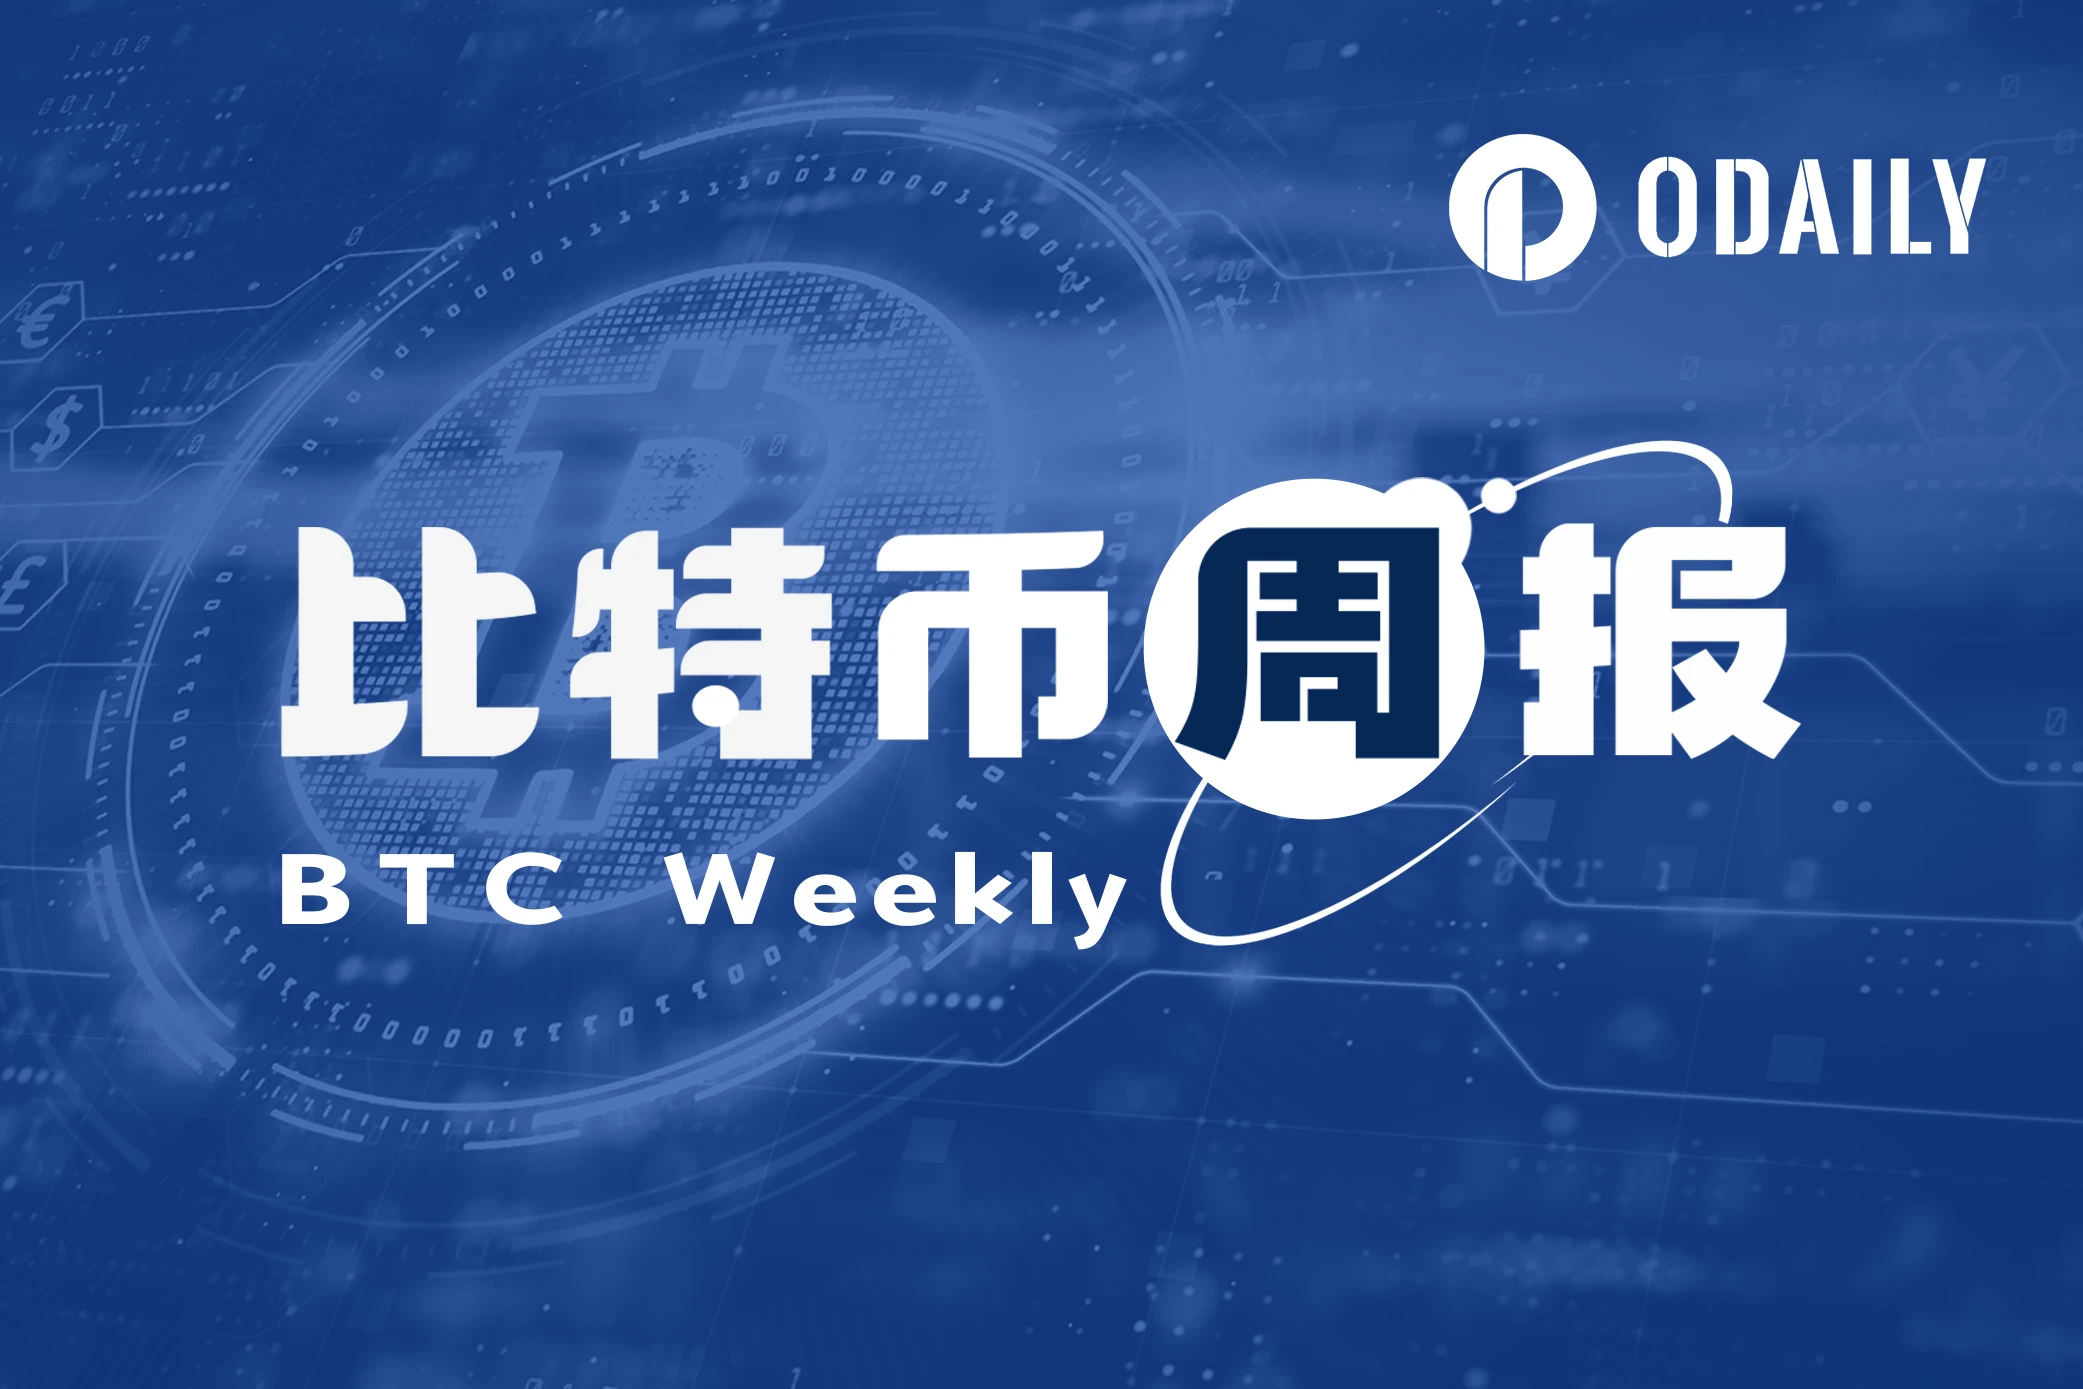 BTC Weekly Report - Atomics Market will announce the investigation report and compensation plan; the currency price range continues to fluctuate (11.20-11.26)